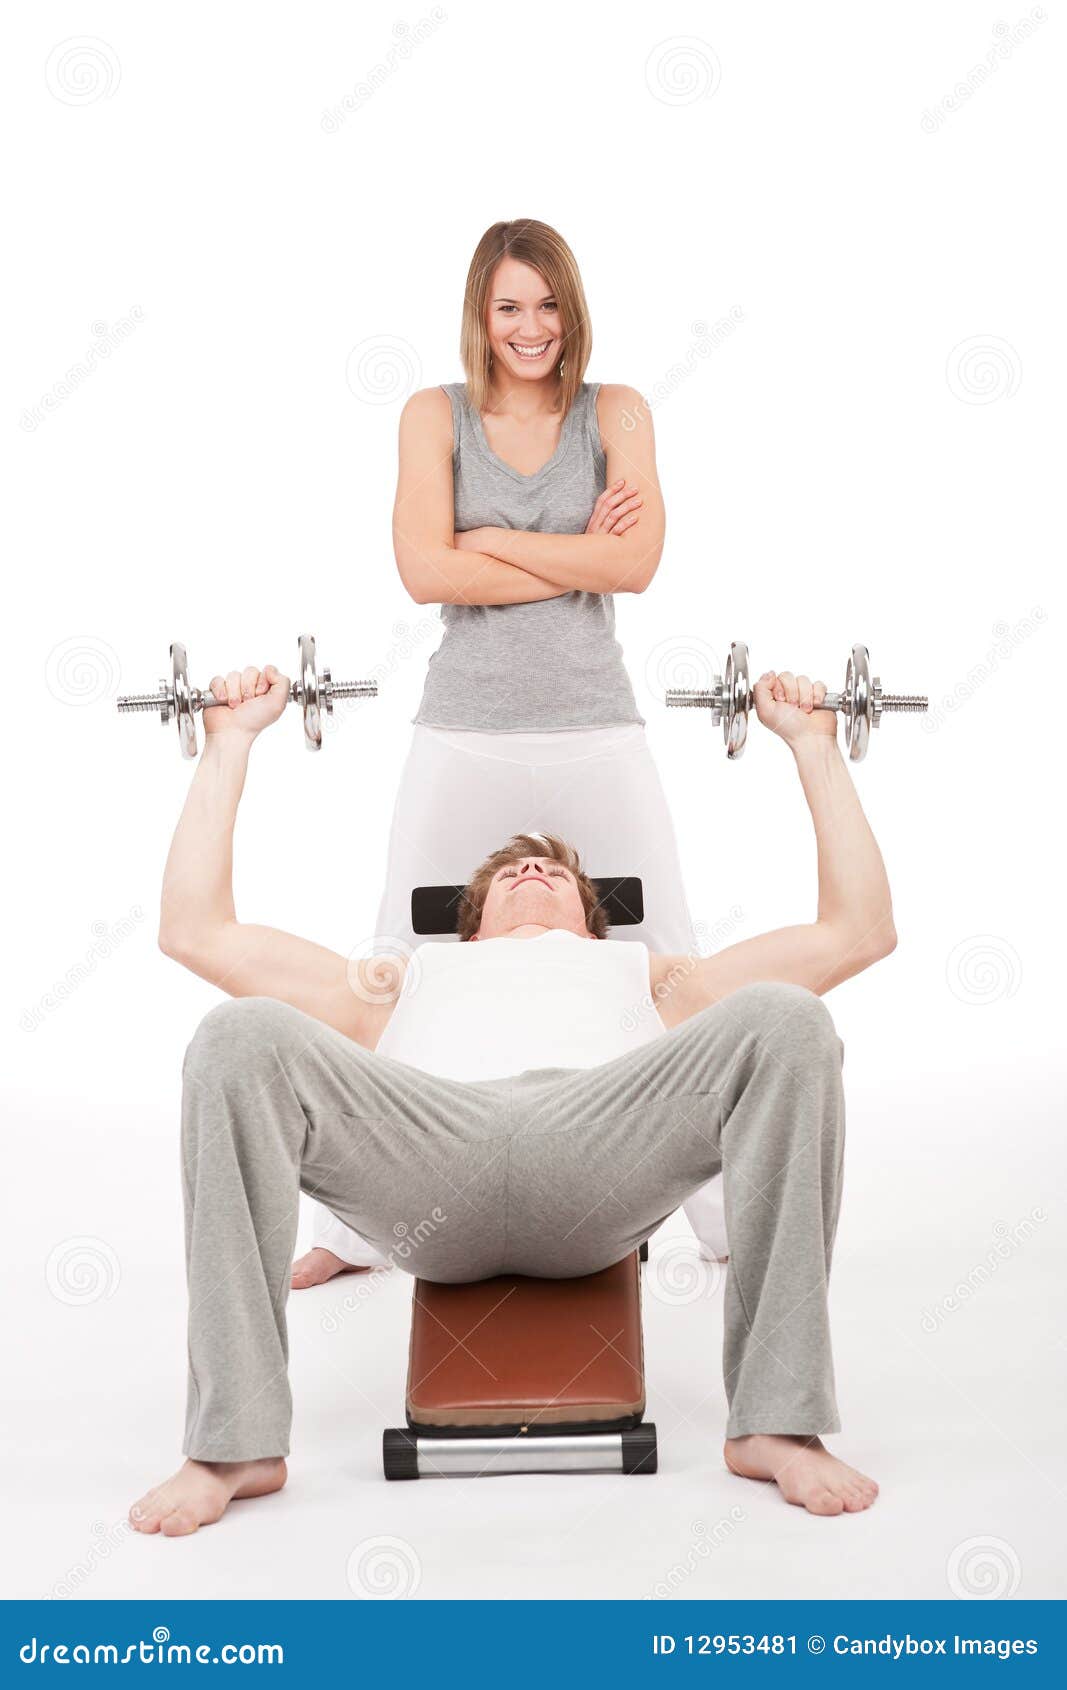  similar stock images of ` Fitness - young man on bench with weights